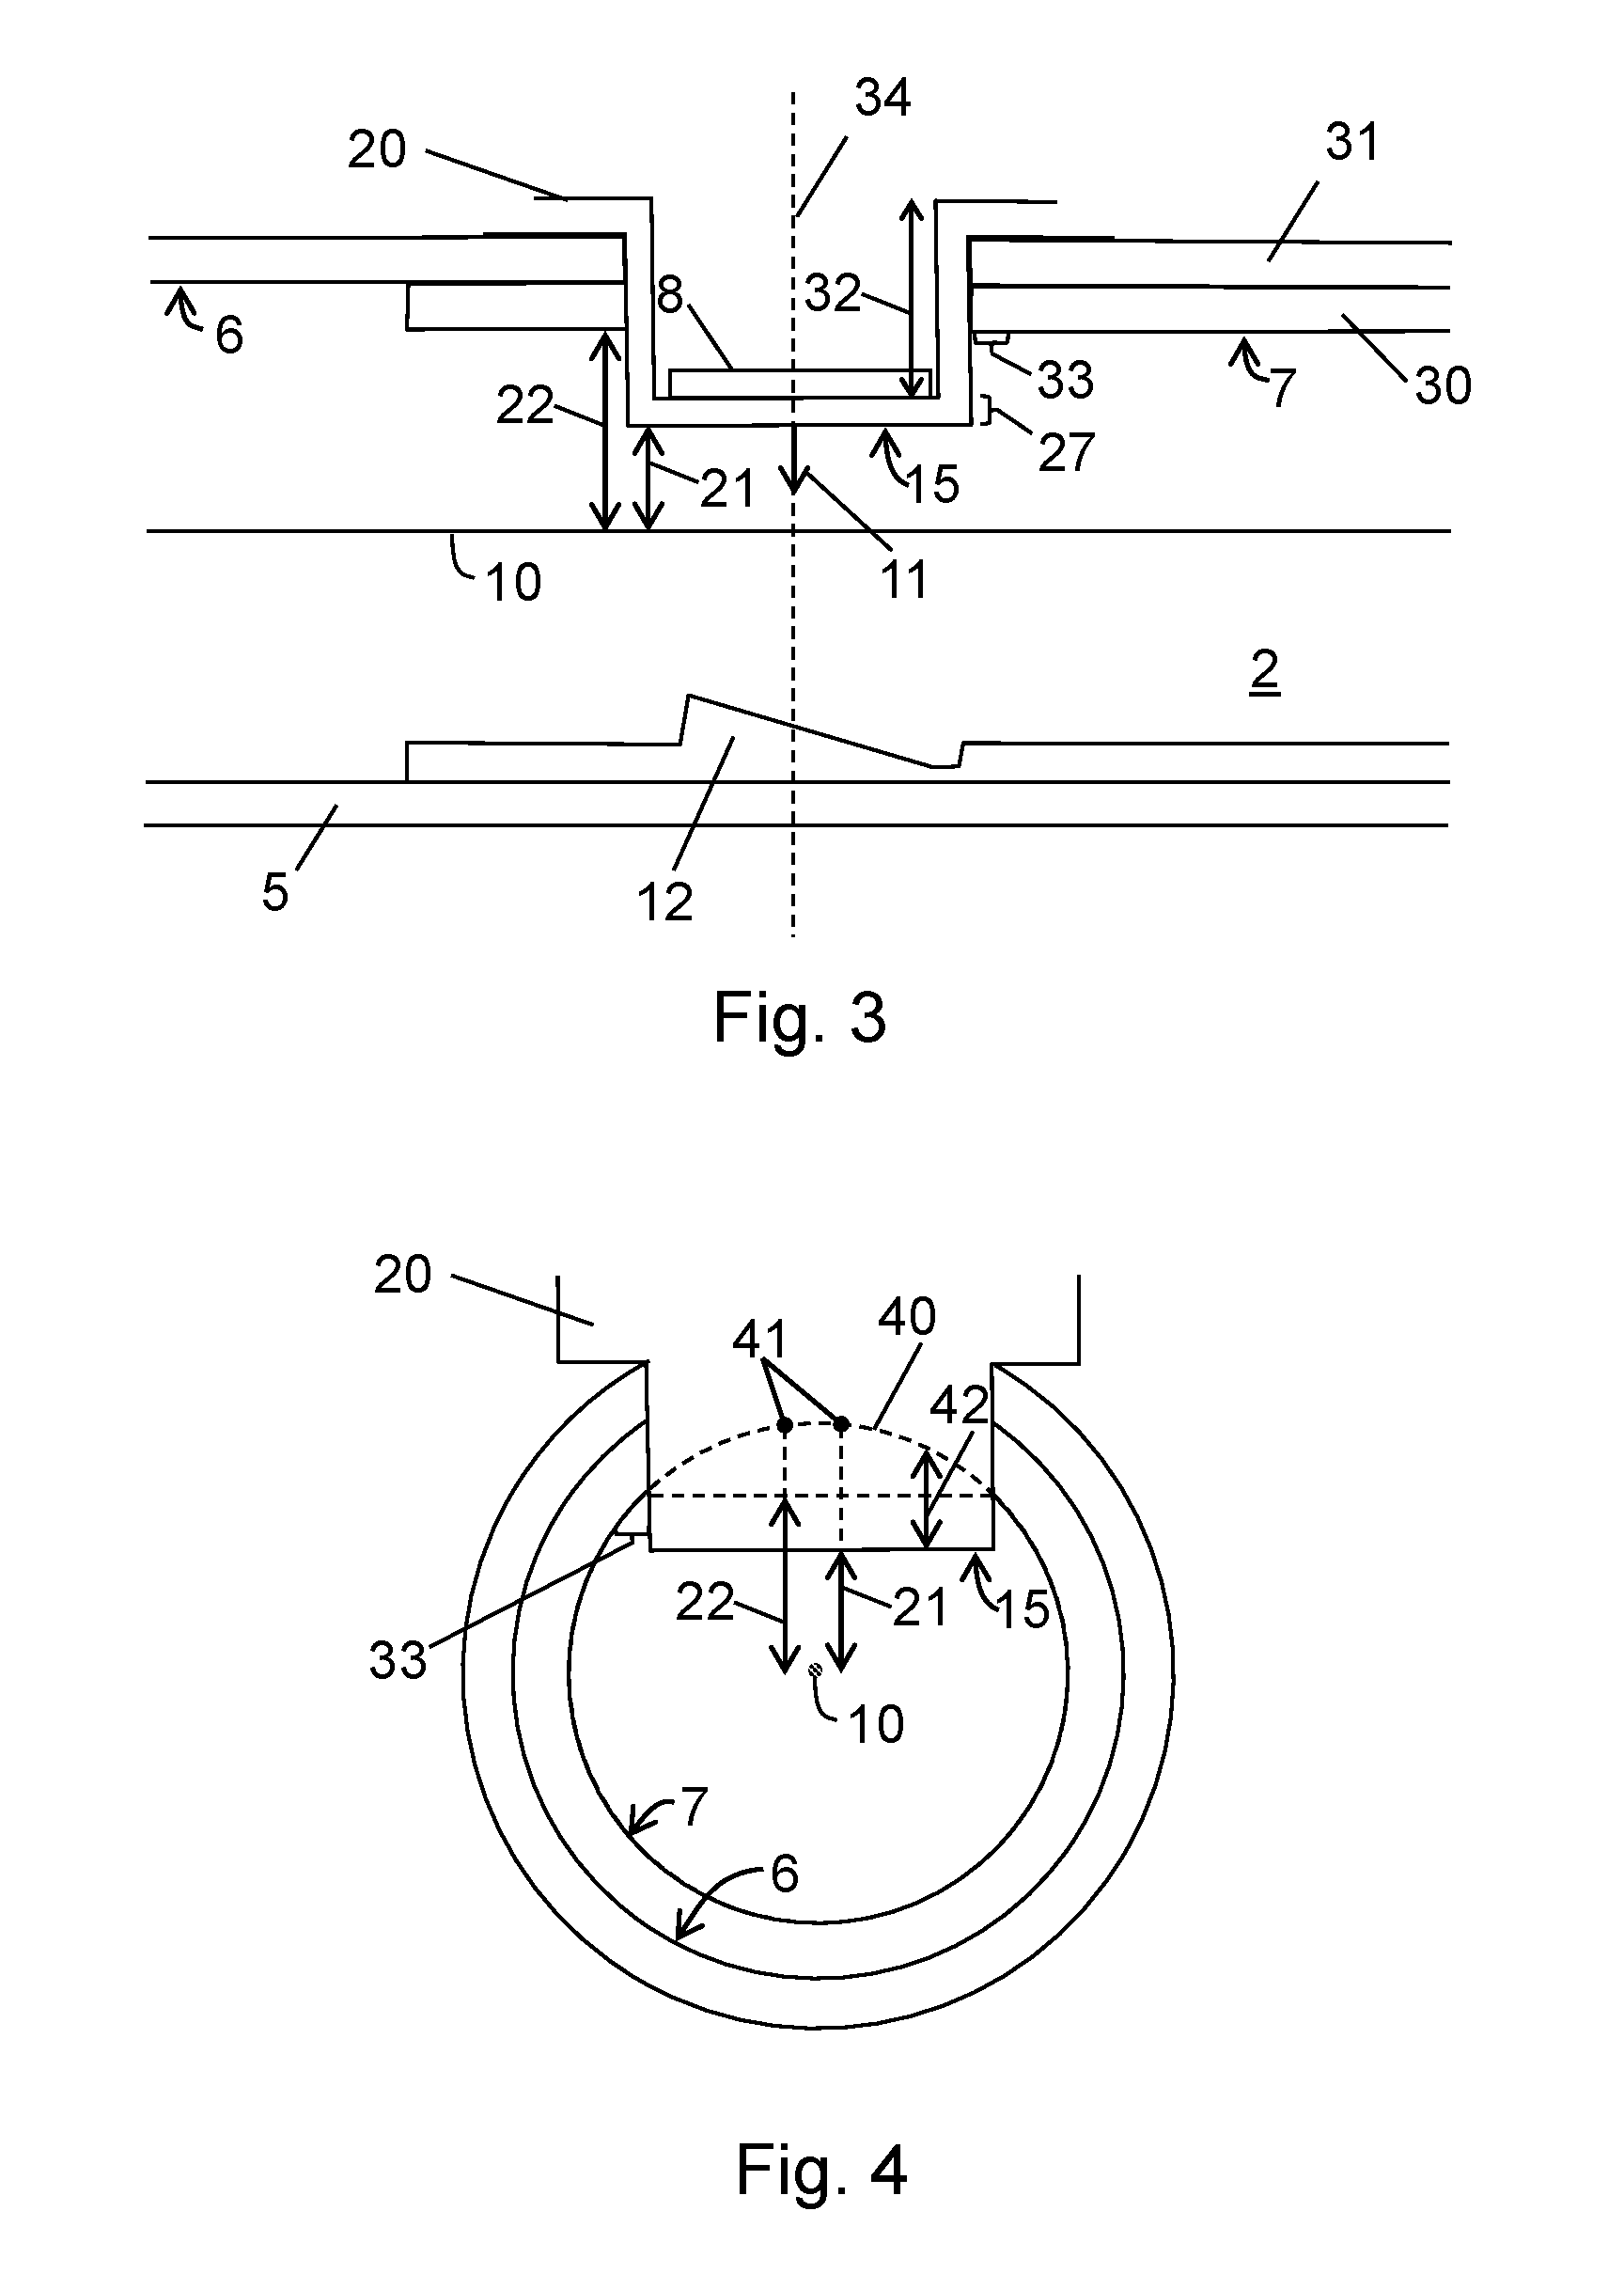 Flow meter with protruding transducers